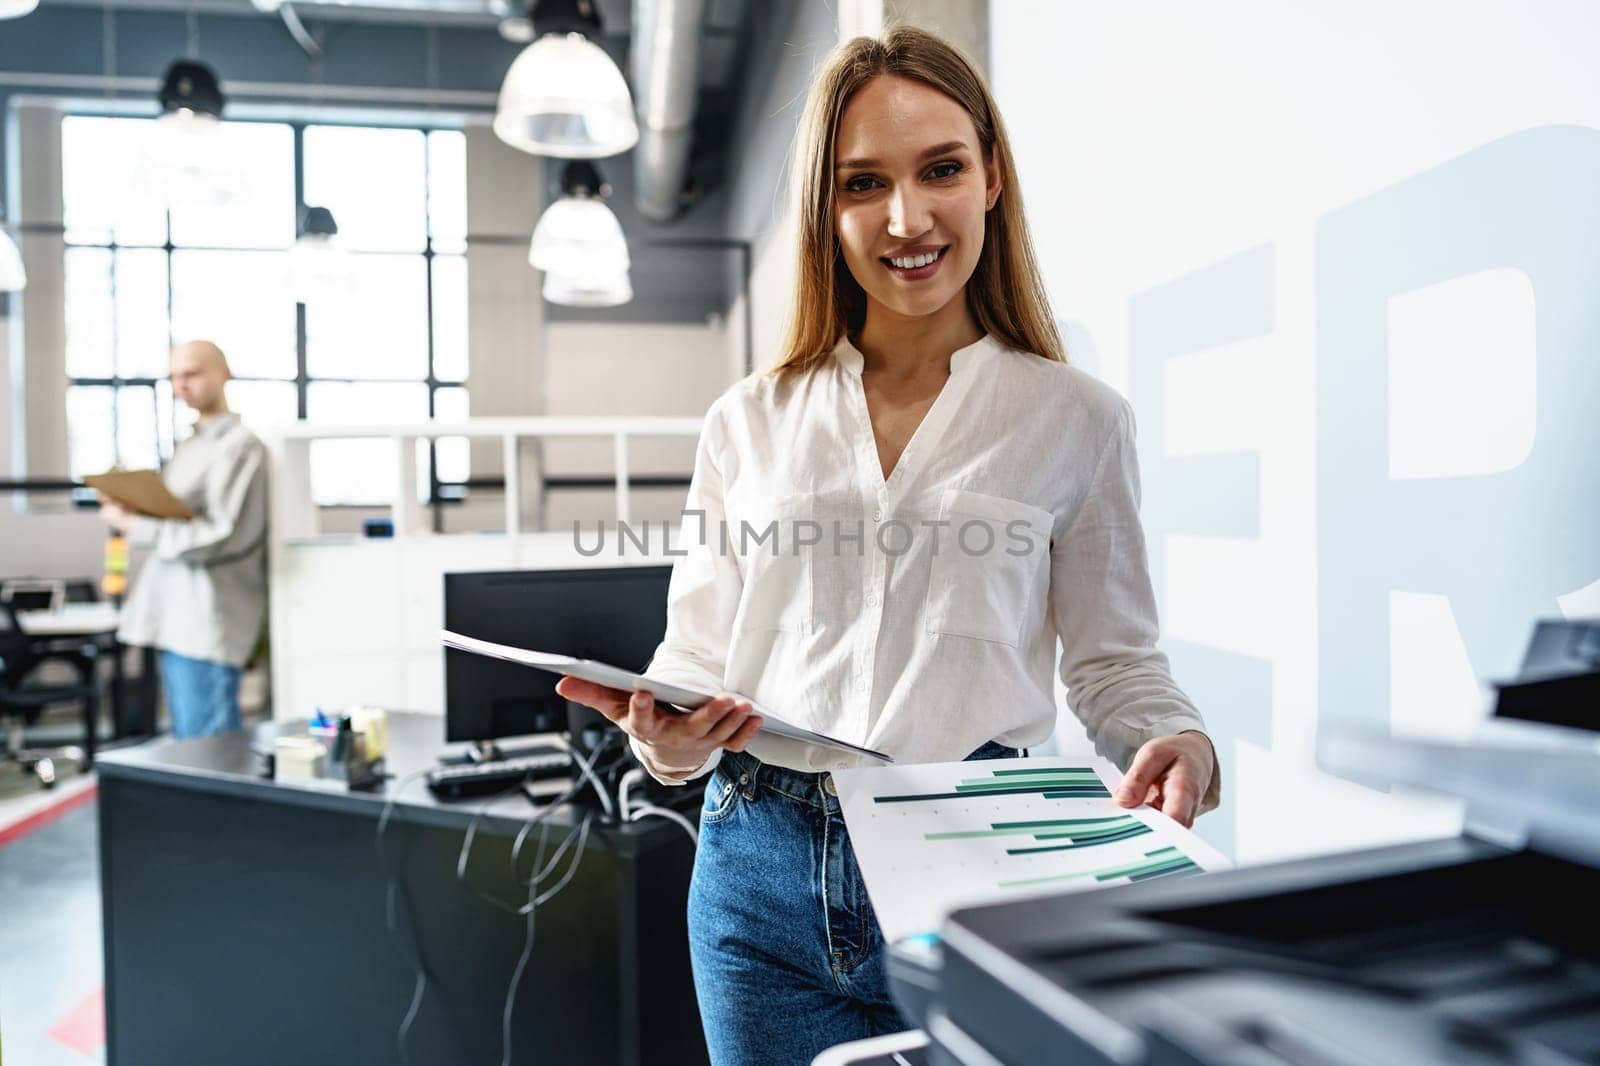 Young employee using modern printer in office, close up